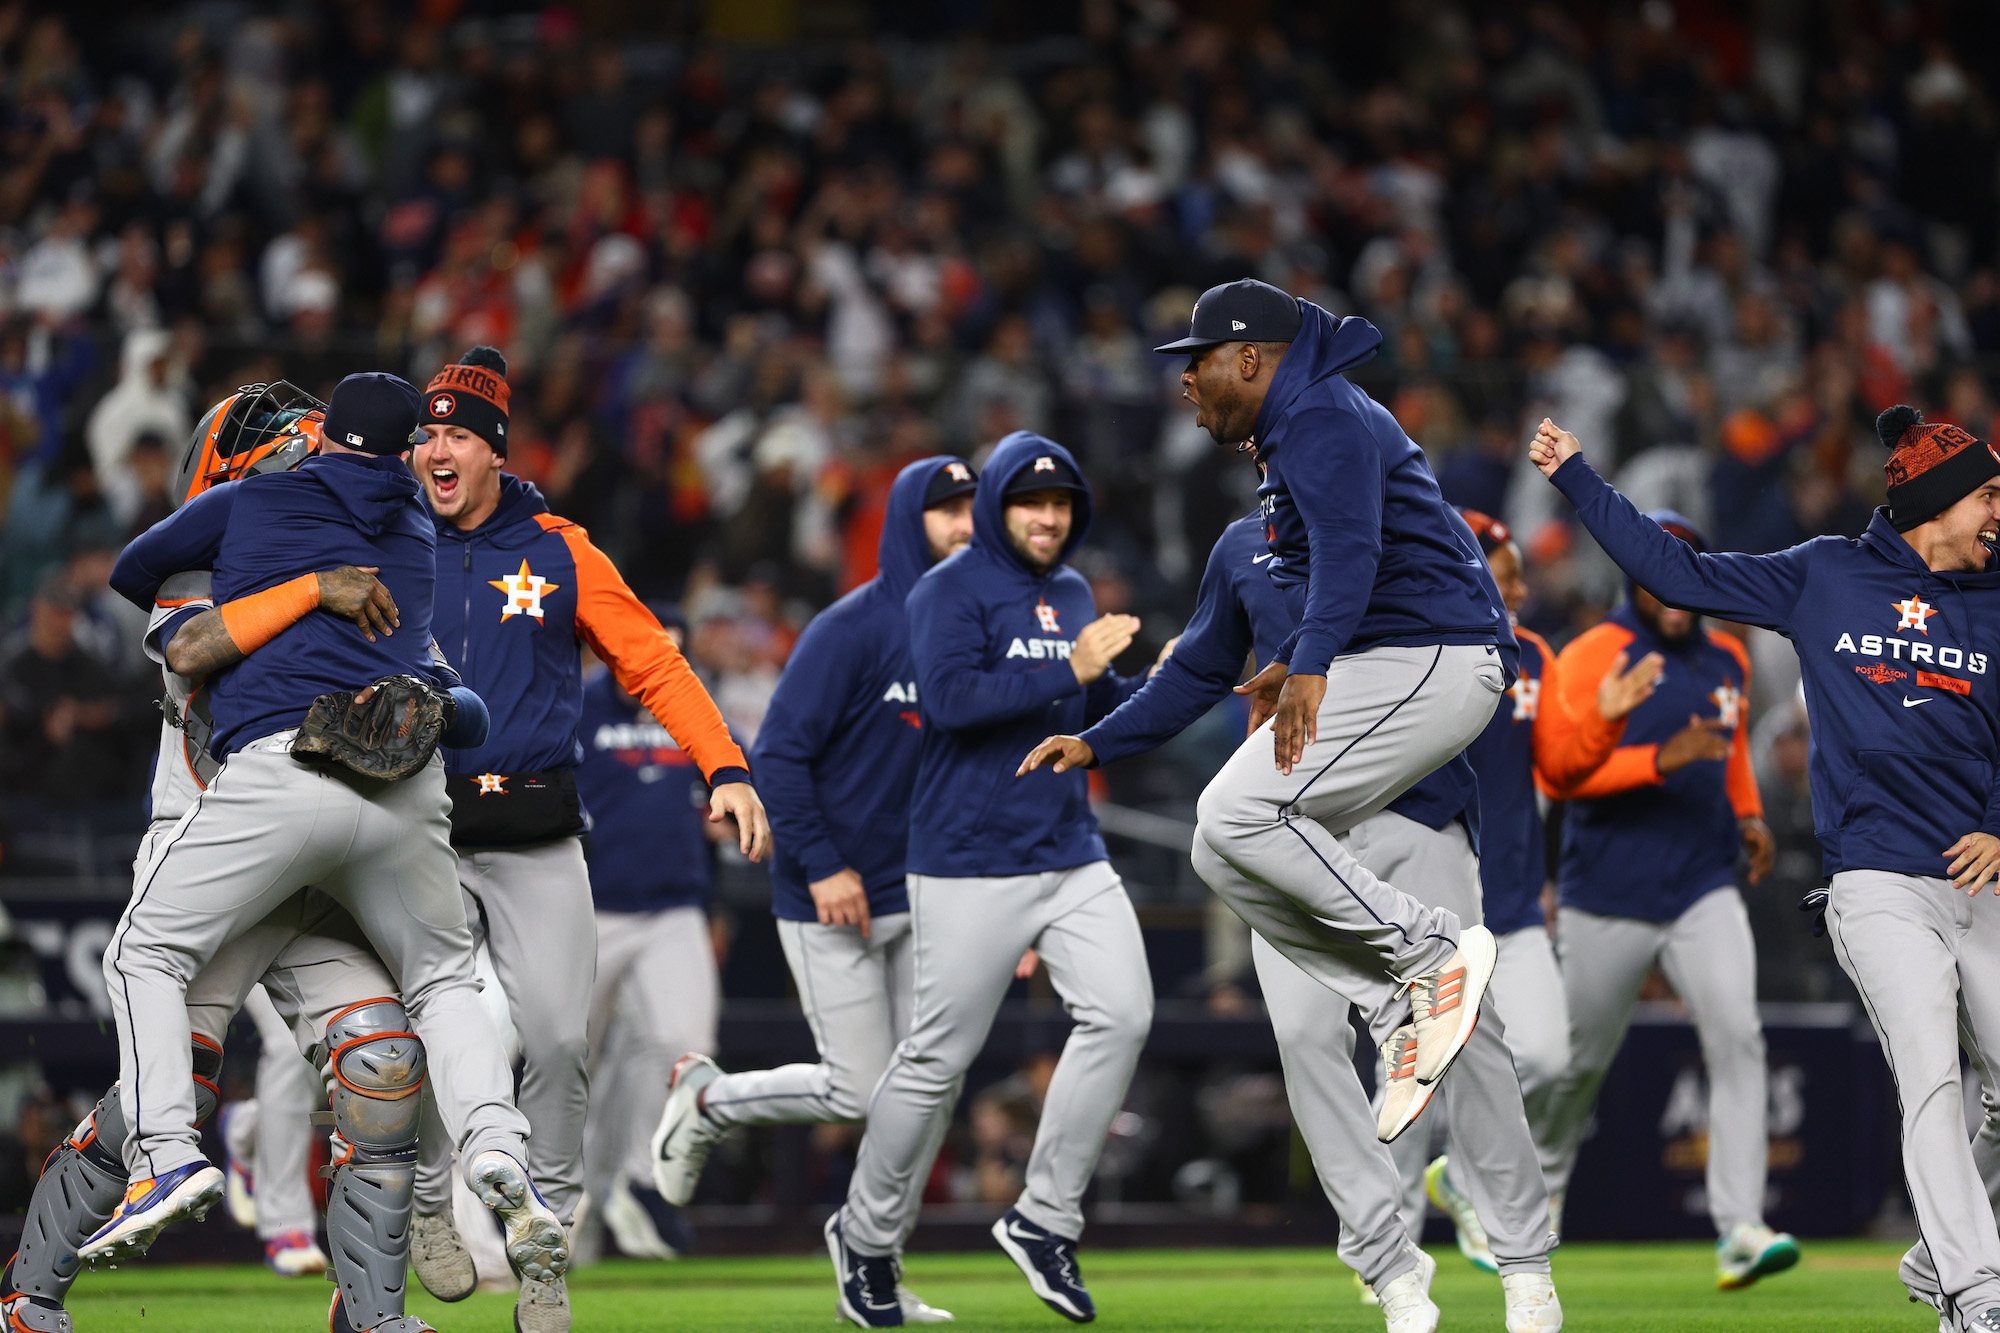 NEW YORK, NEW YORK - OCTOBER 23: The Houston Astros celebrate after defeating the New York Yankees in game four to win the American League Championship Series at Yankee Stadium on October 23, 2022 in the Bronx borough of New York City. (Photo by Elsa/Getty Images)